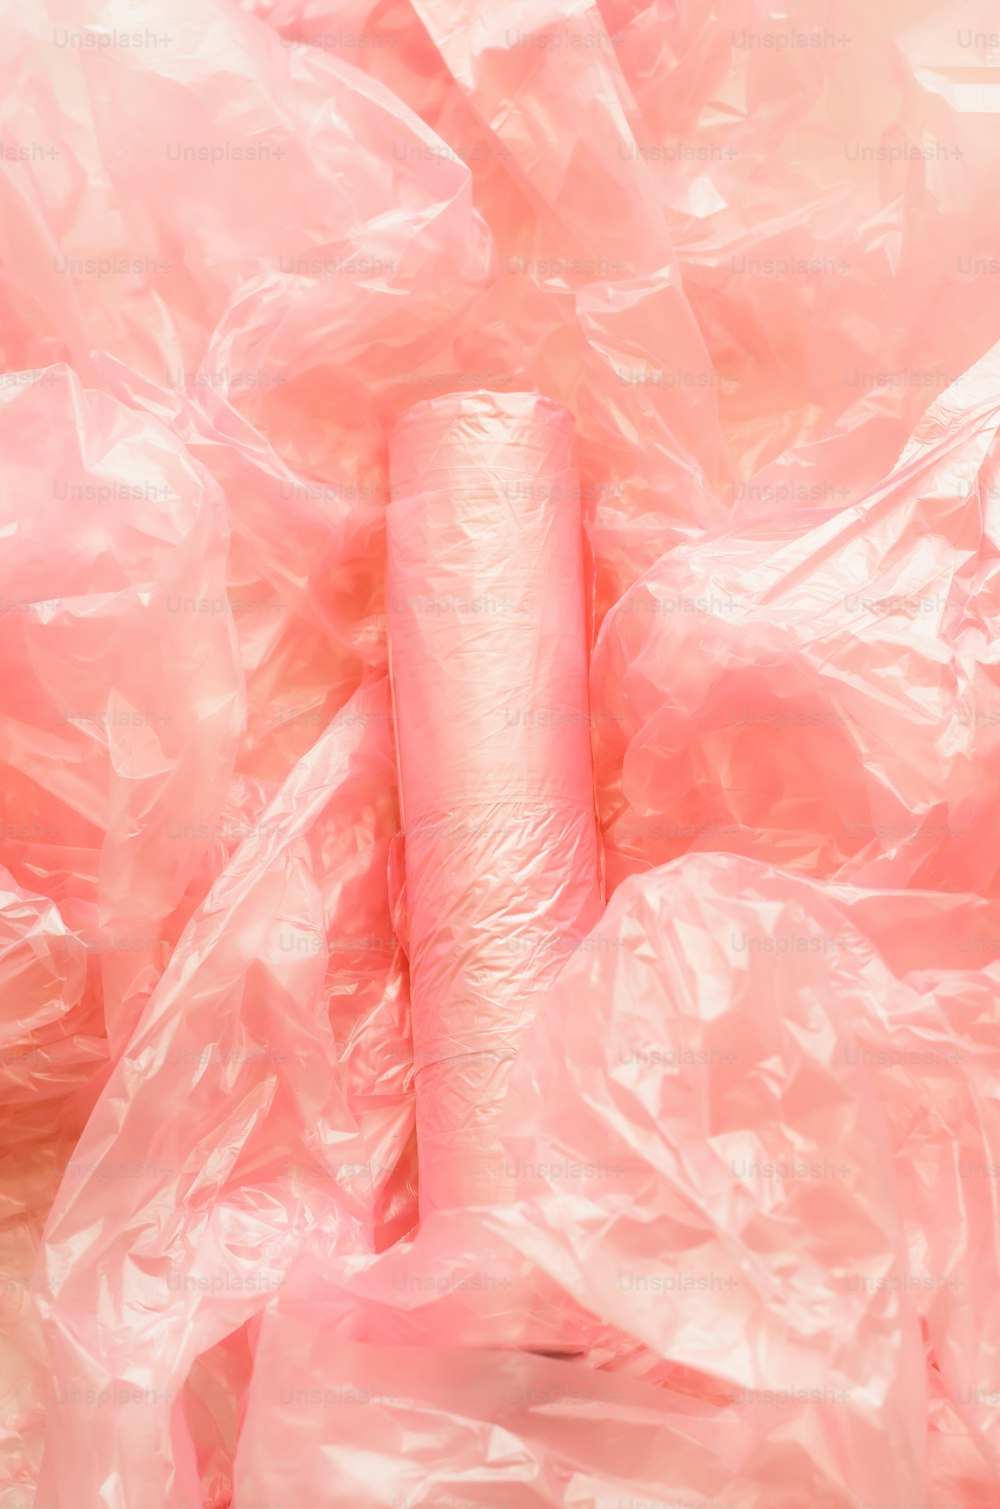 a roll of toilet paper wrapped in plastic